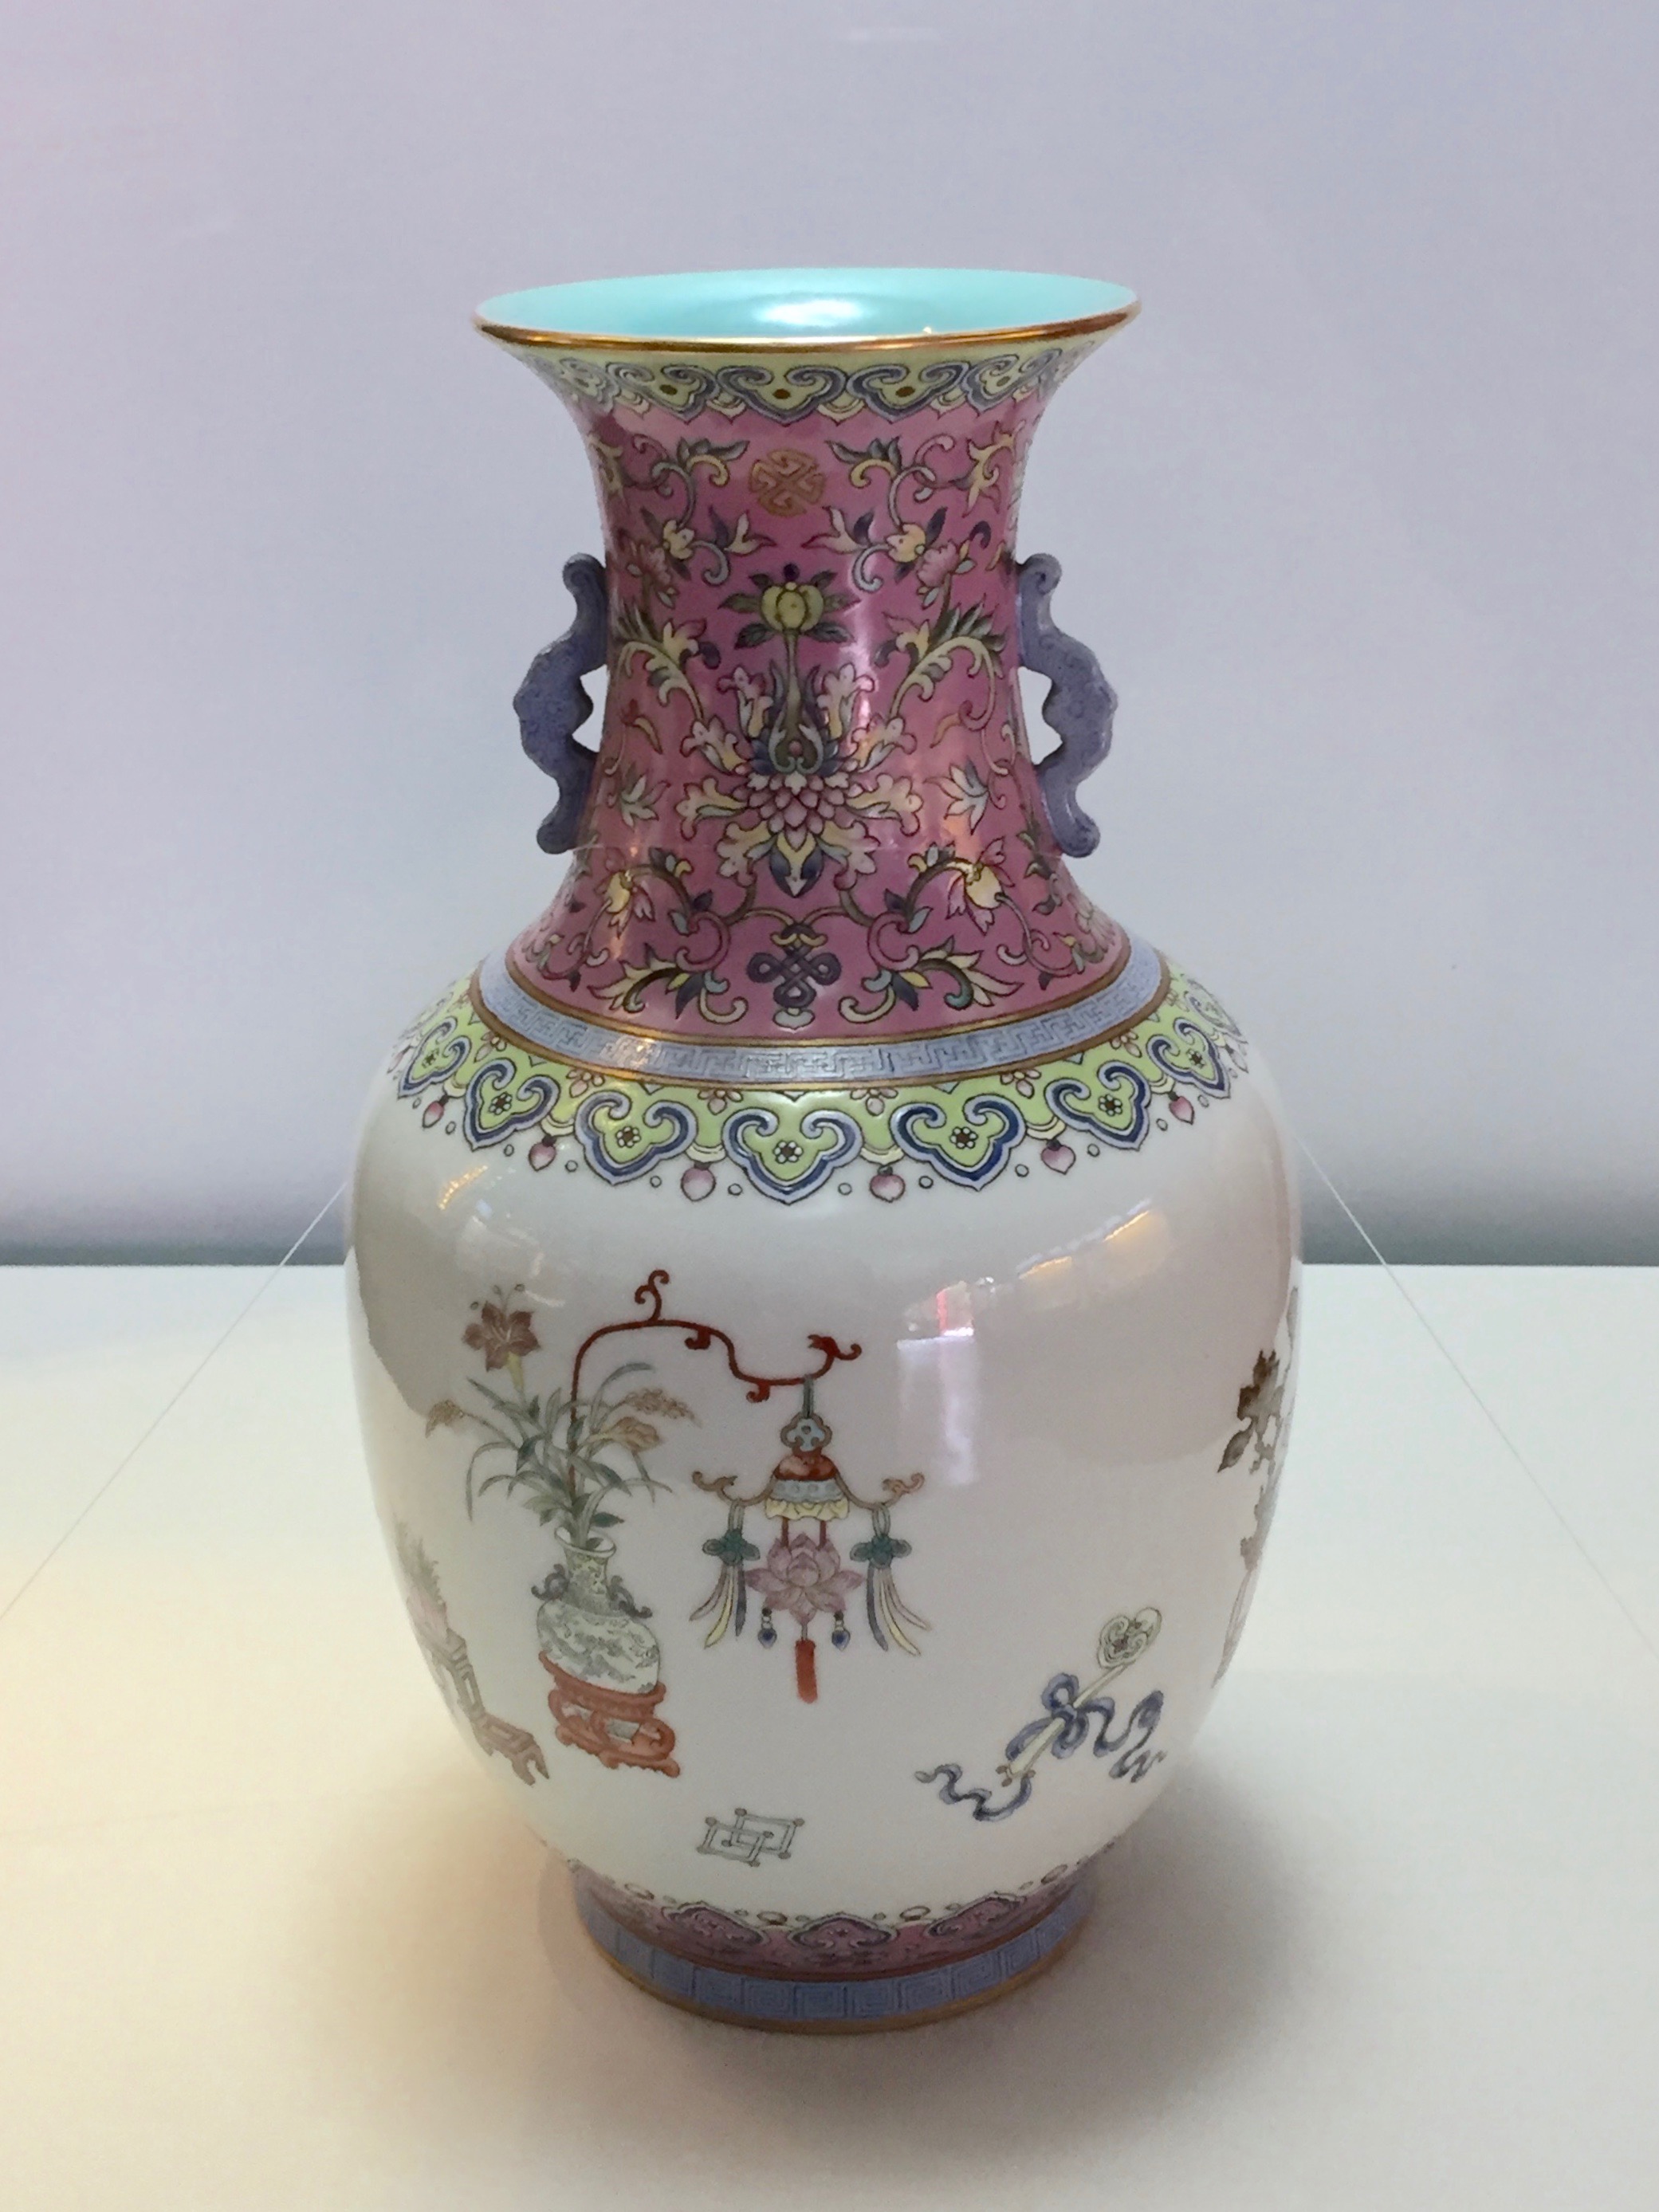  Double-Eared Vase&nbsp;  Daoguang Emperor's Reign (1821-1850), Qing Dynasty 